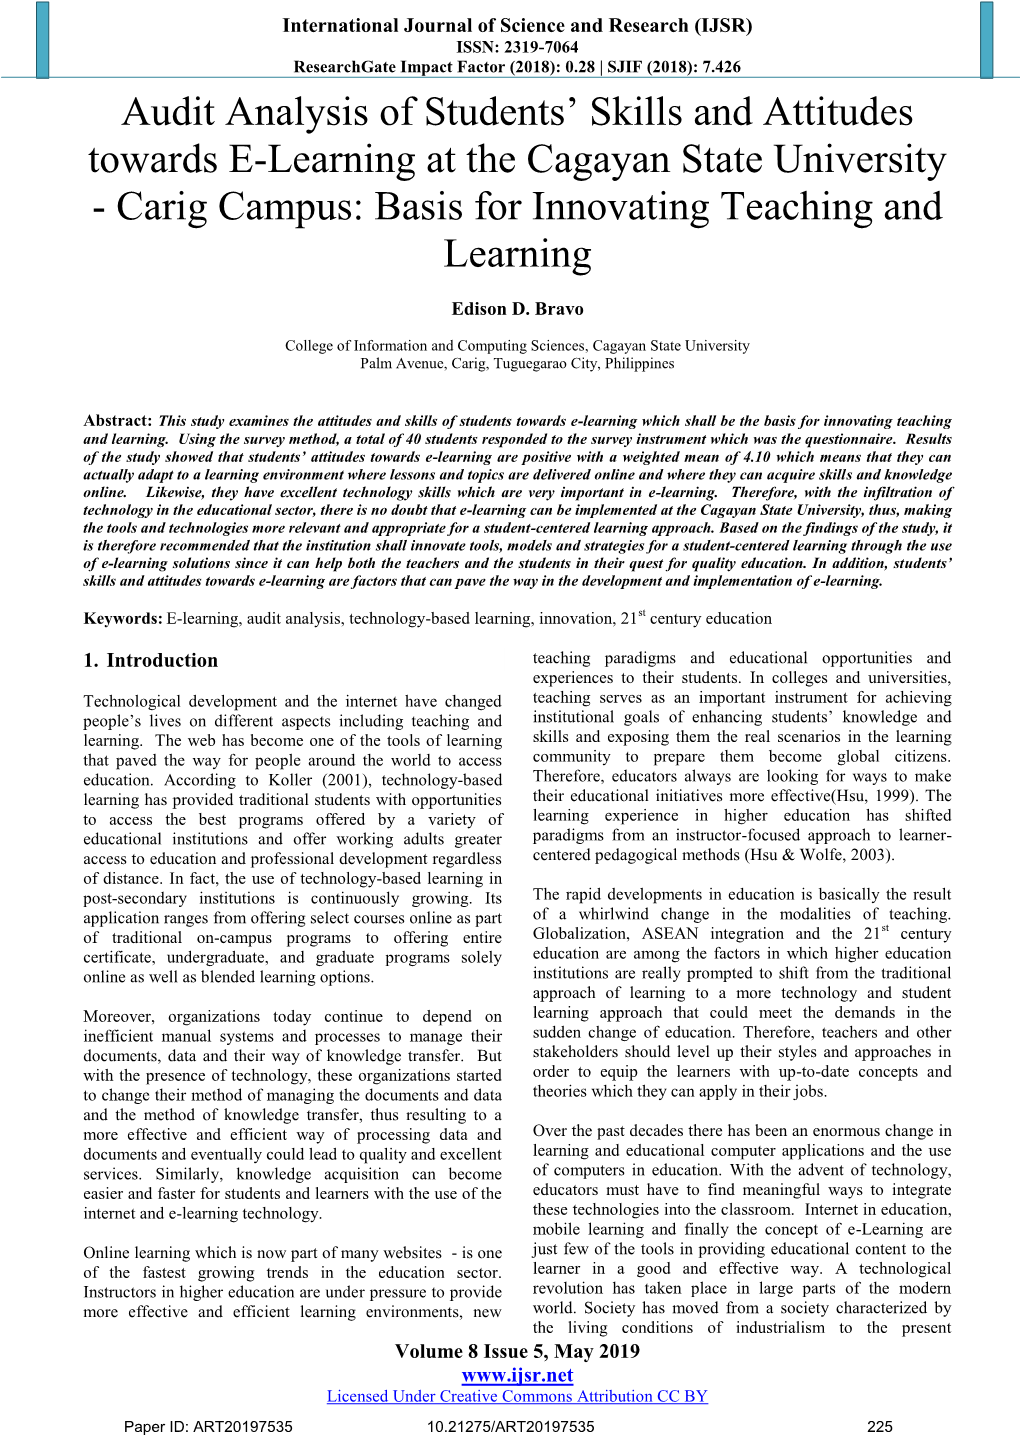 Audit Analysis of Students' Skills and Attitudes Towards E-Learning at the Cagayan State University